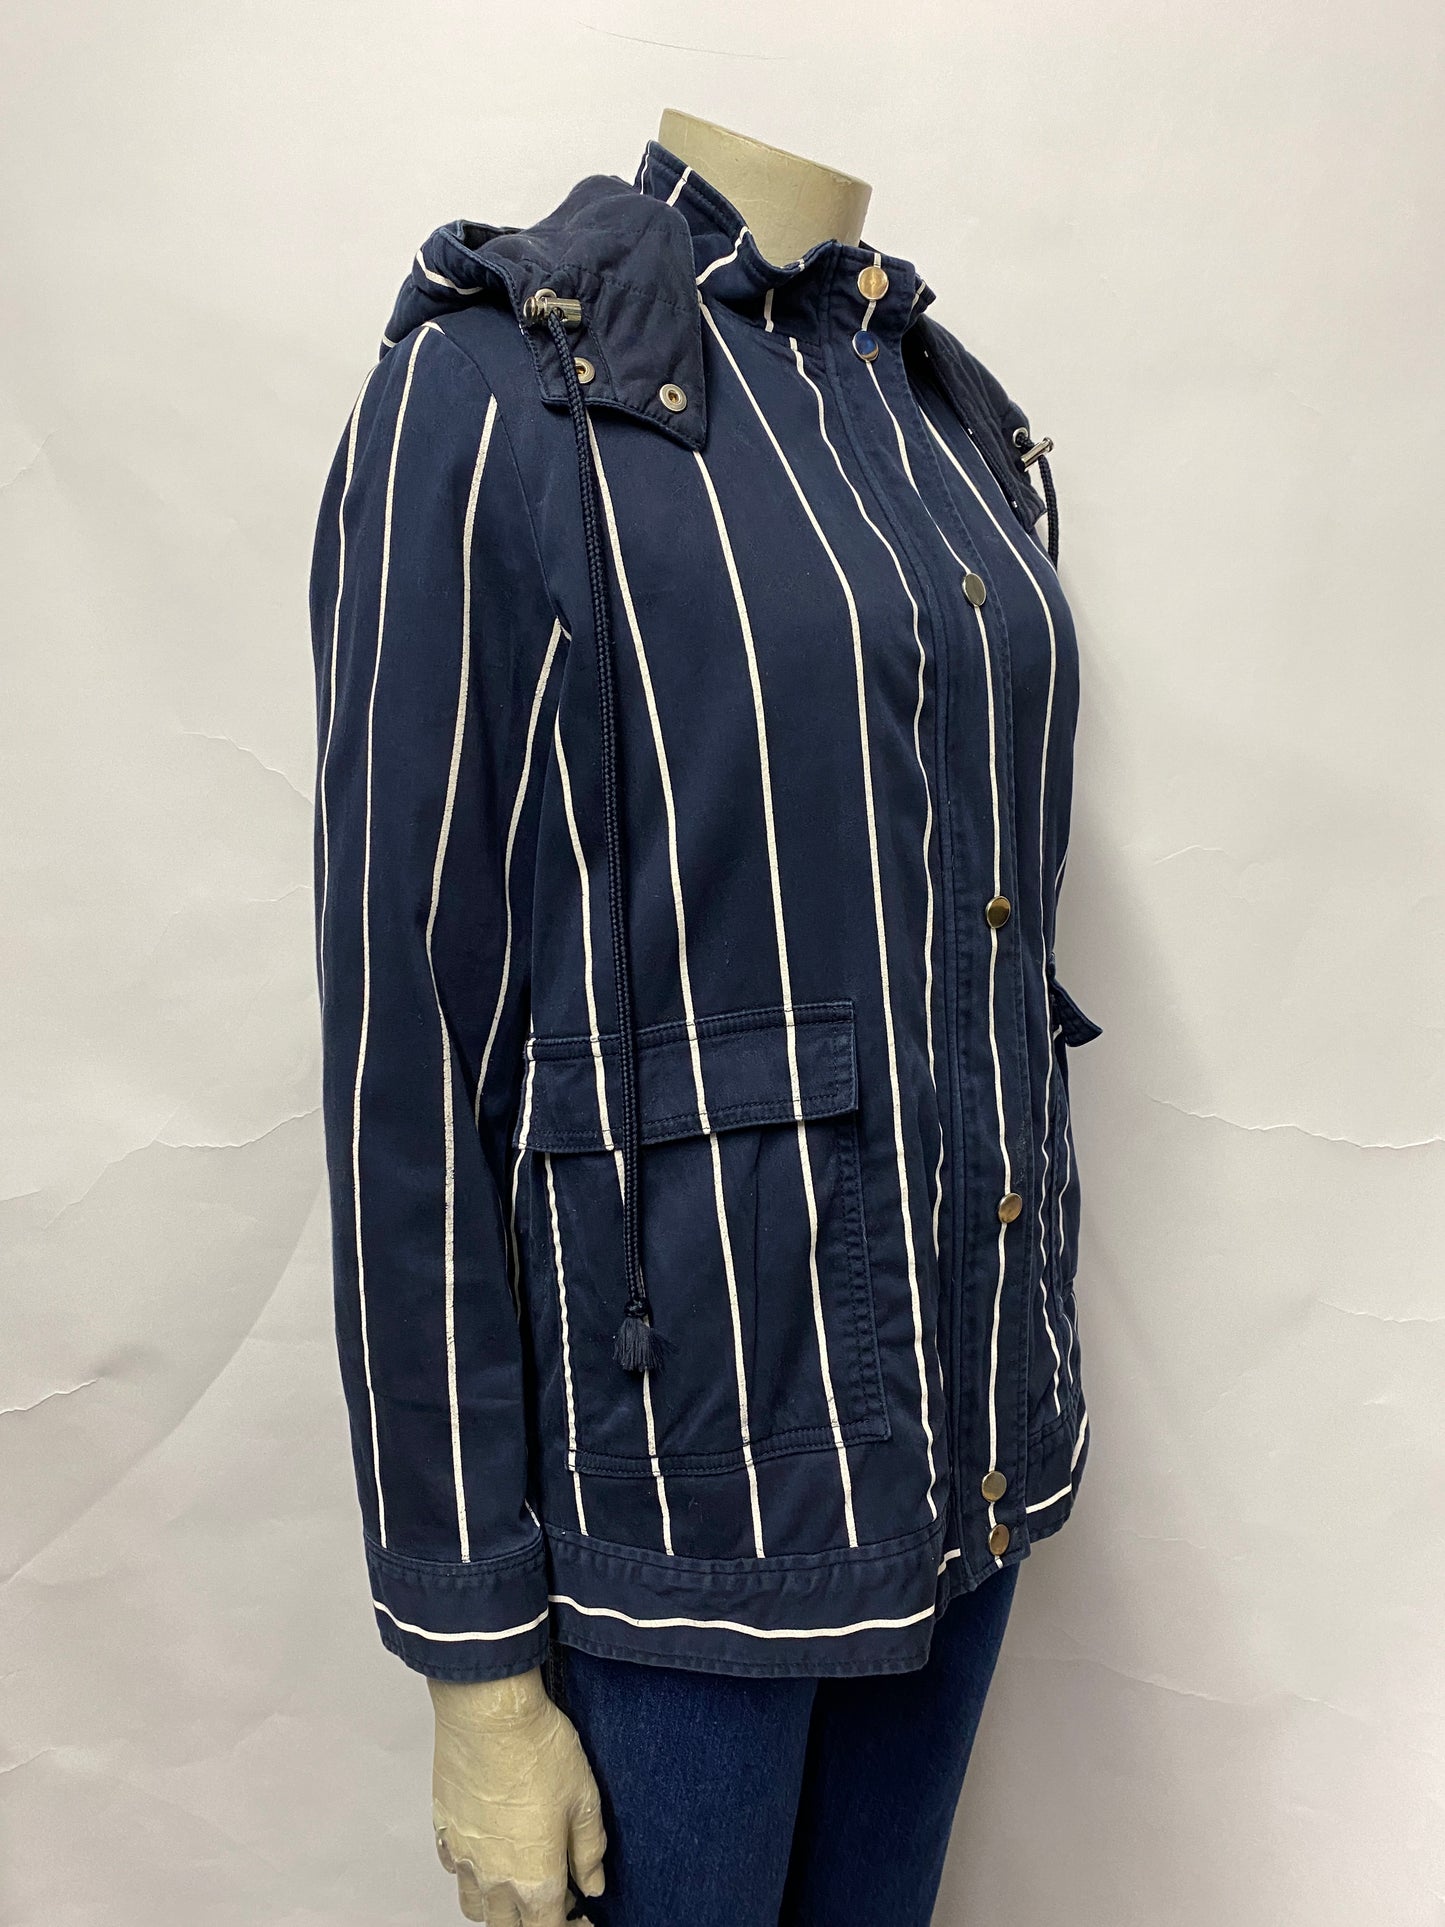 Laudie Pierlot Navy and White Striped Hooded Jacket 8